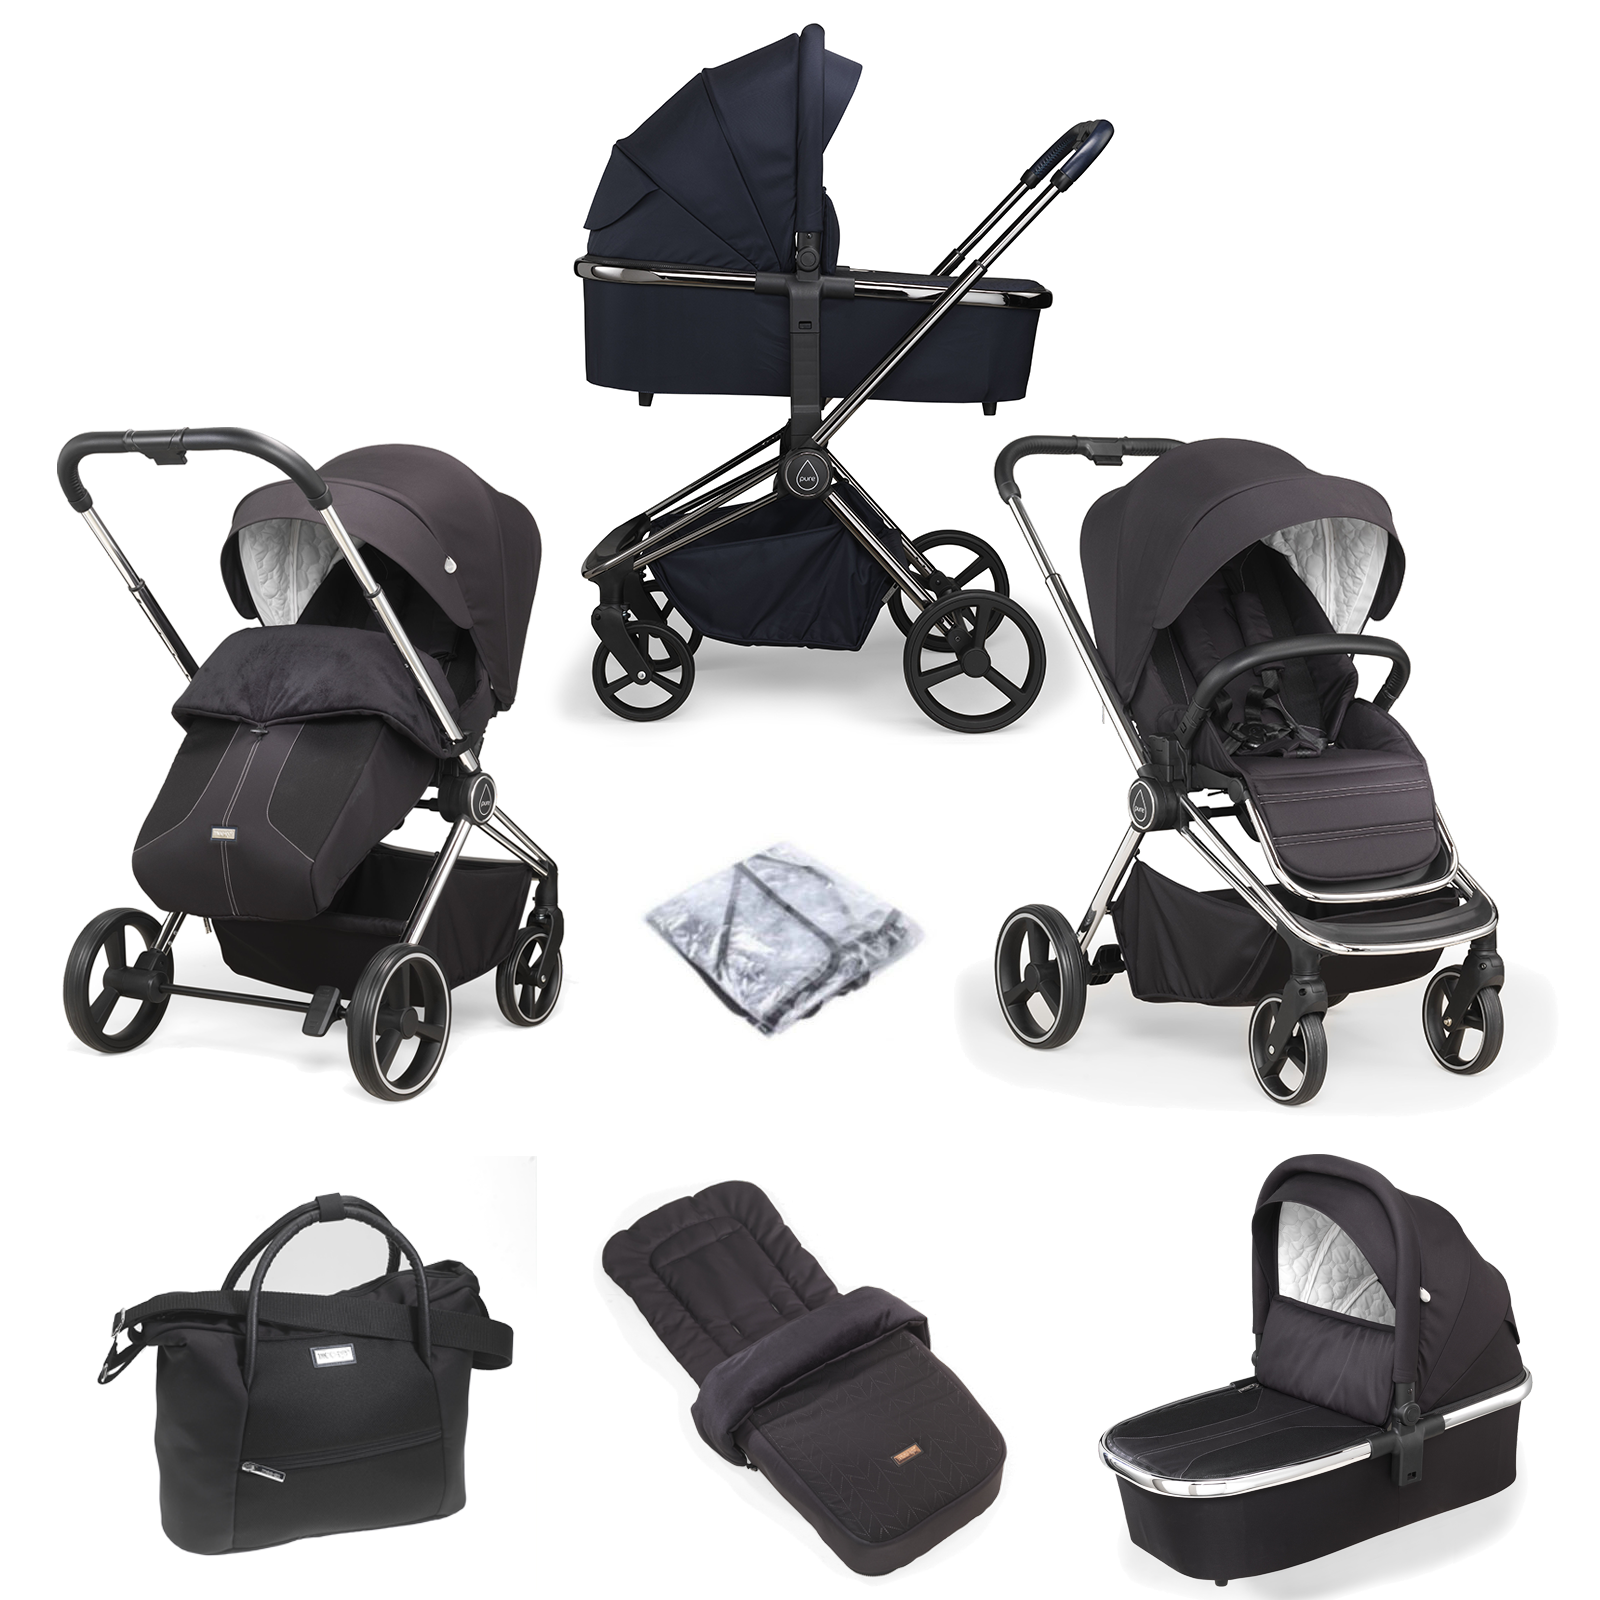 Mee-go Pure Pushchair with Carrycot & Accessories - Black